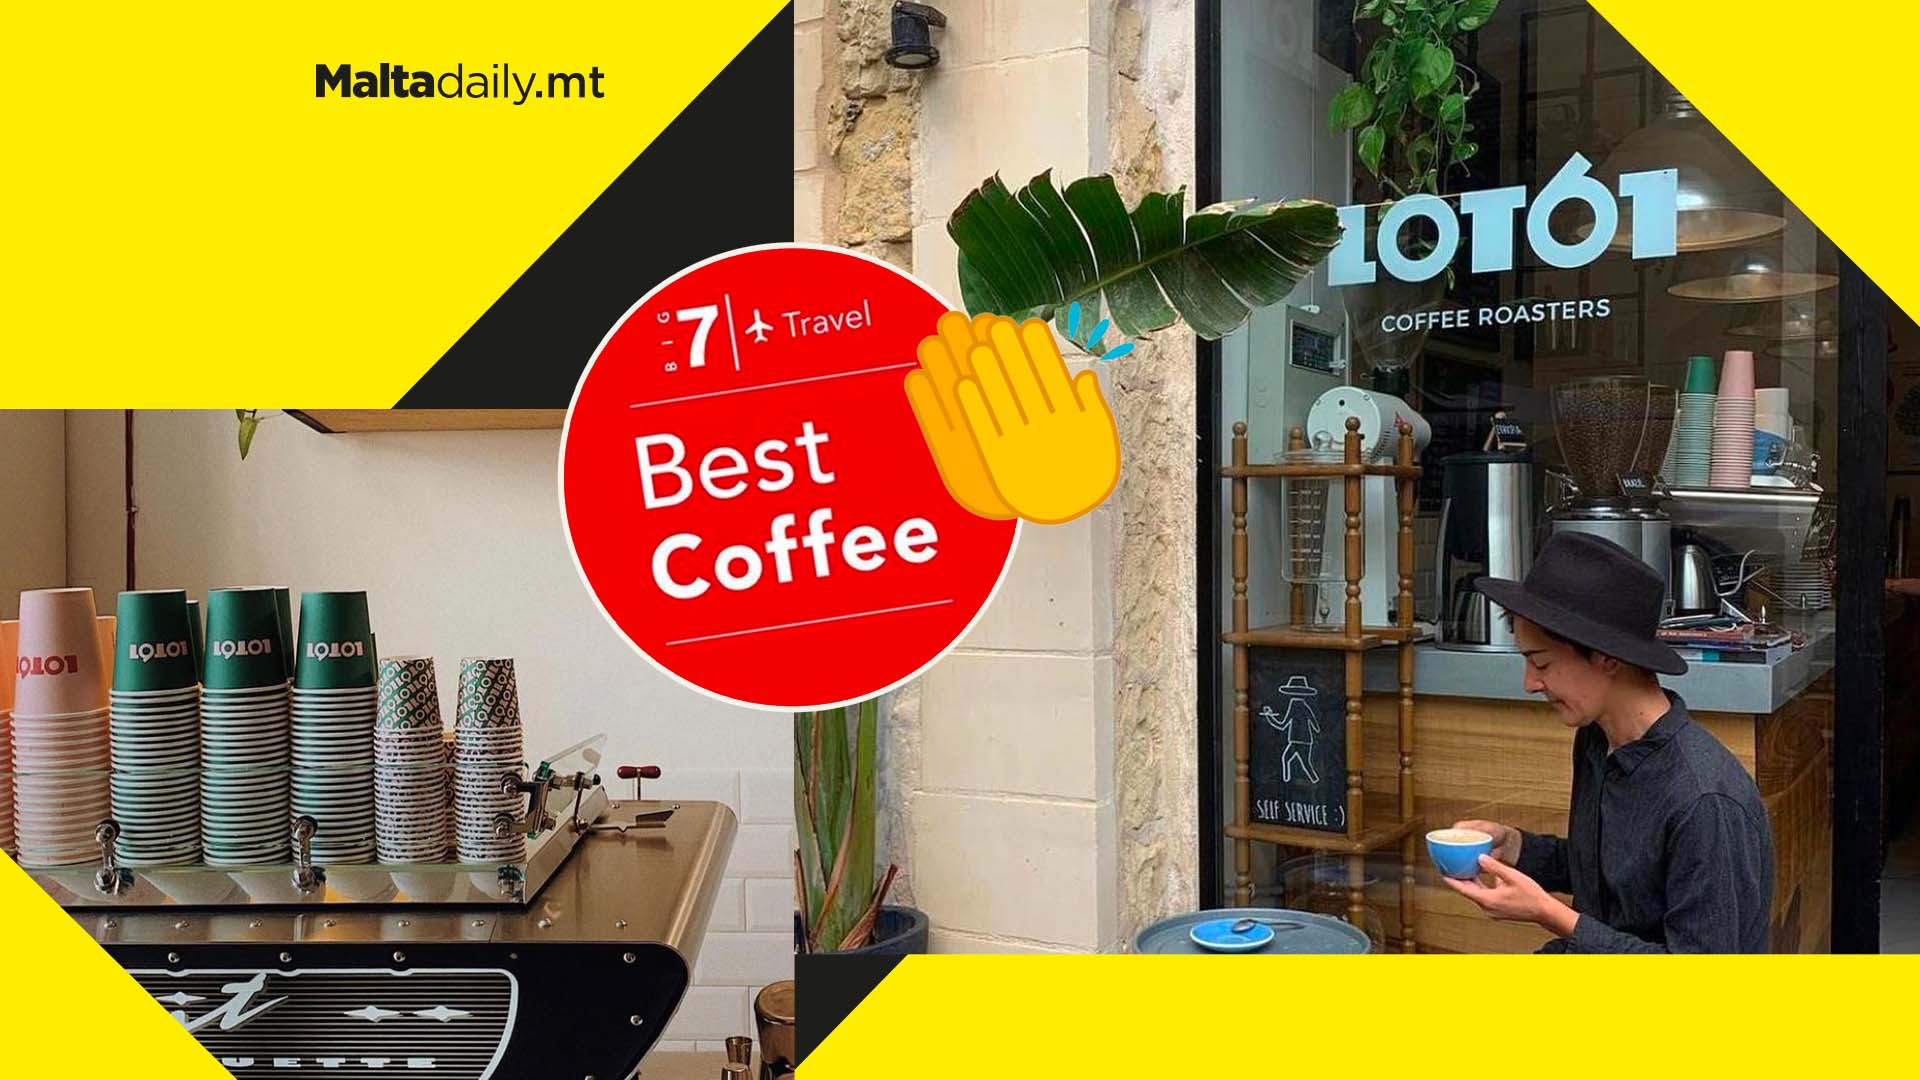 Local coffee outlet Lot 61 ranked among Europe’s top 50 cafes